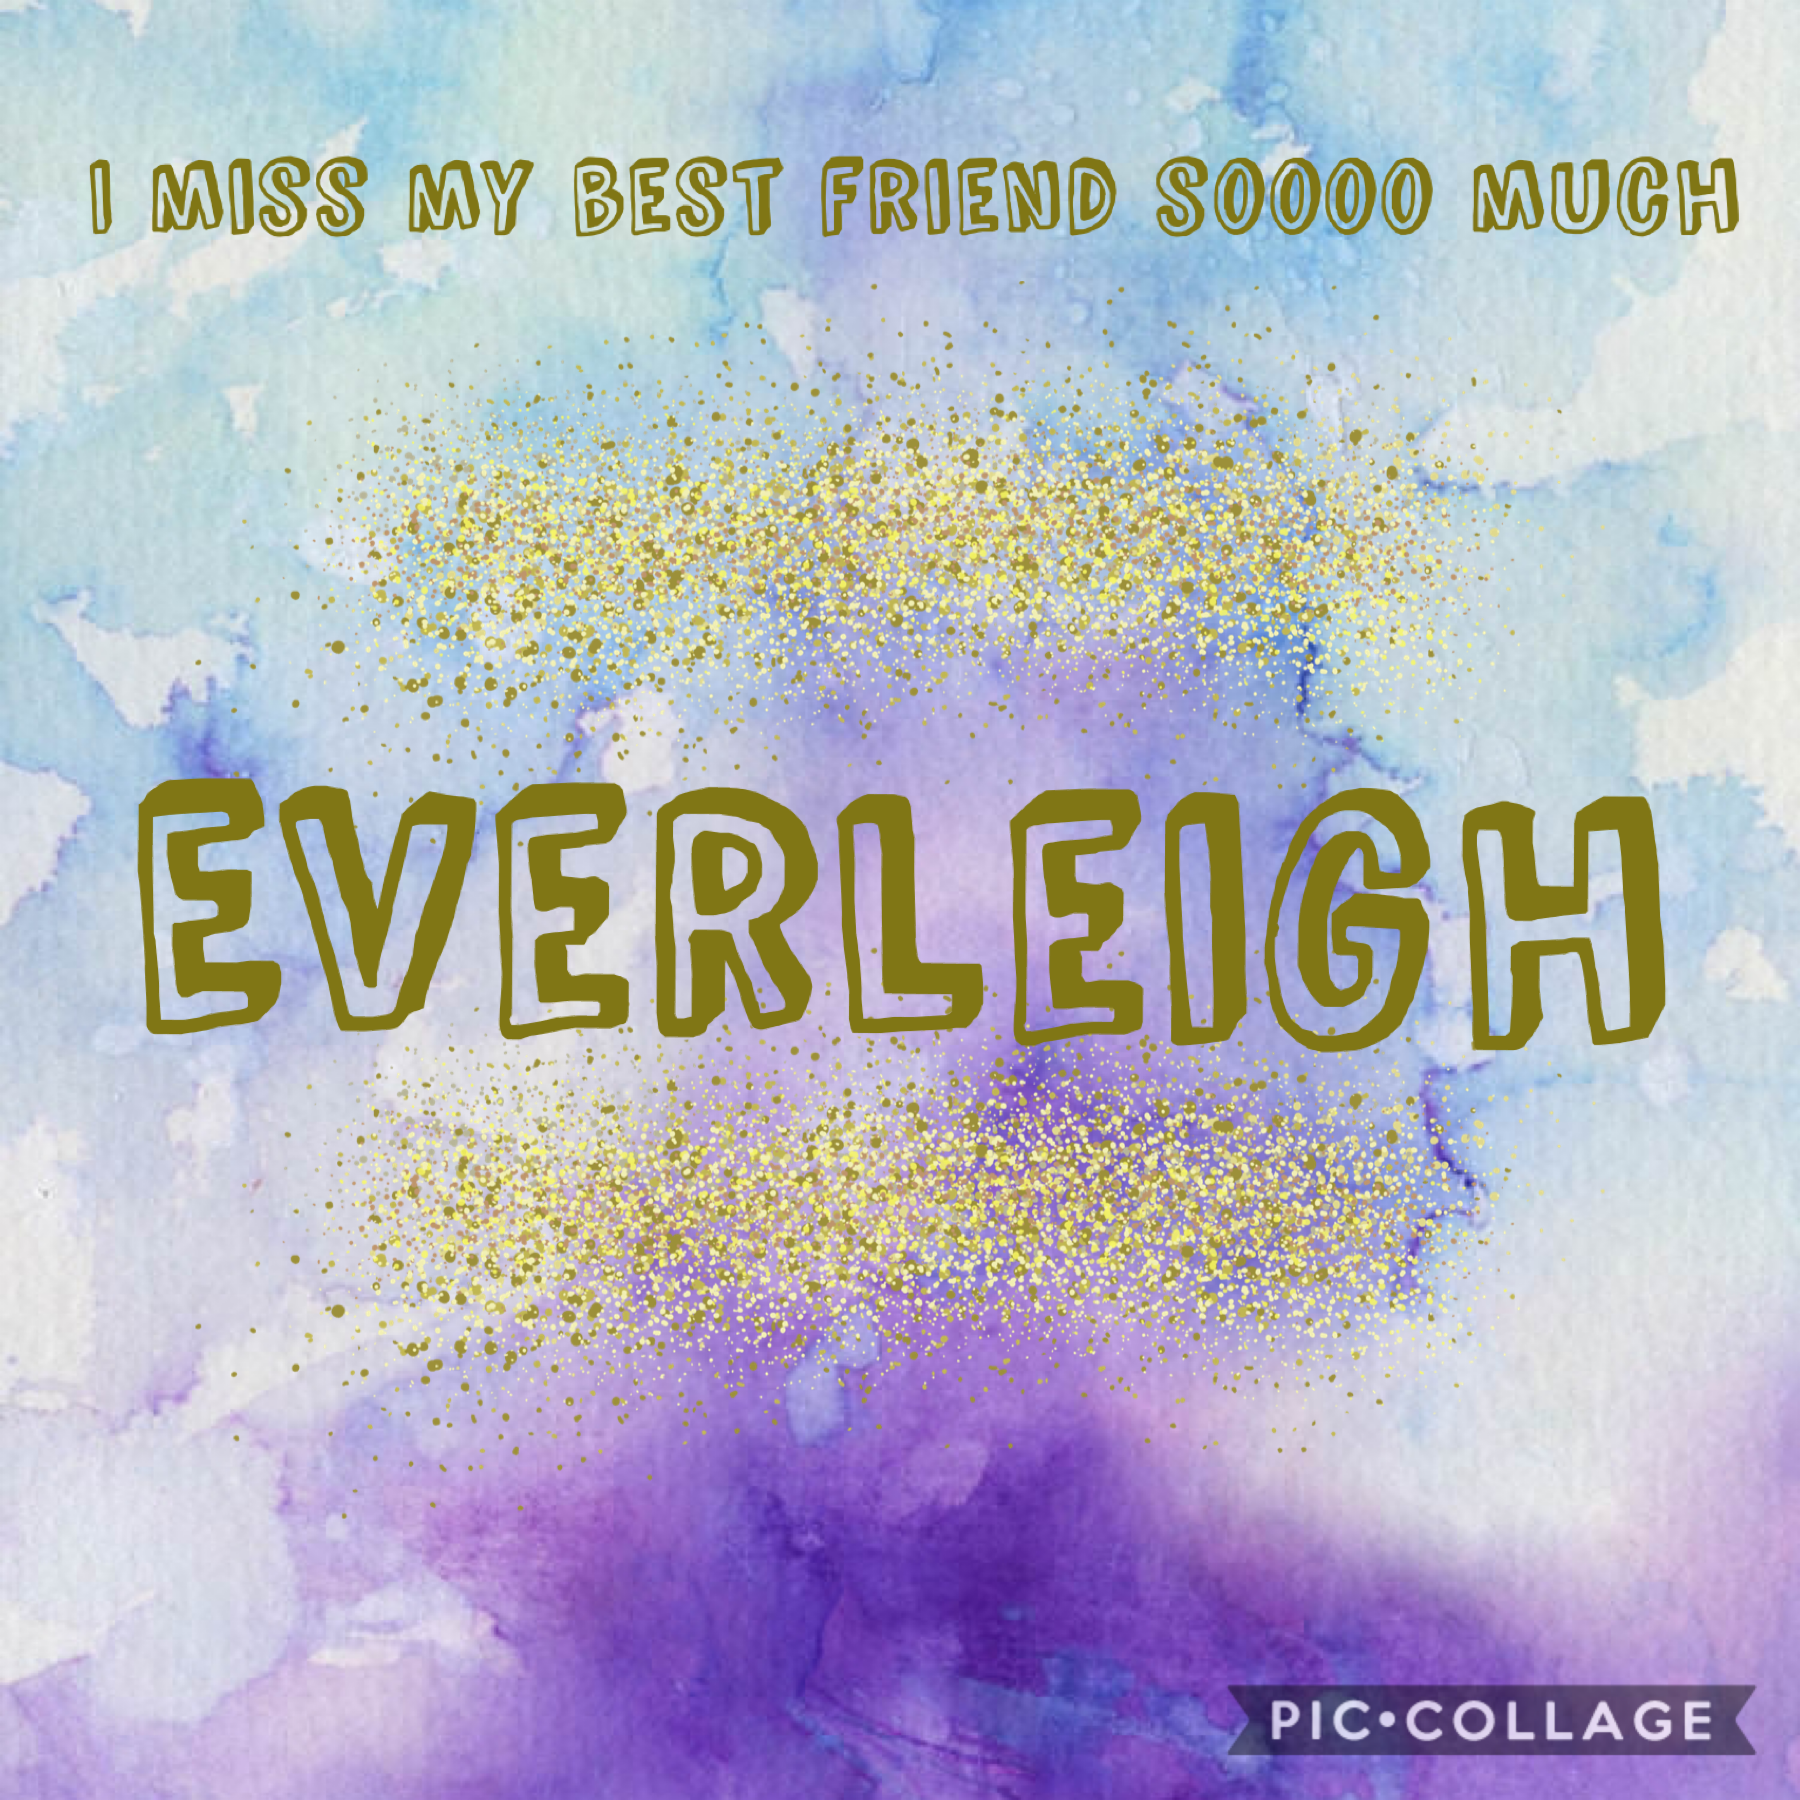 I miss my best friend everleigh and all you guys are my friends not because you are following me because you are kind and sweet🤩😄😻😻🥰😄😻😄😄😻😻